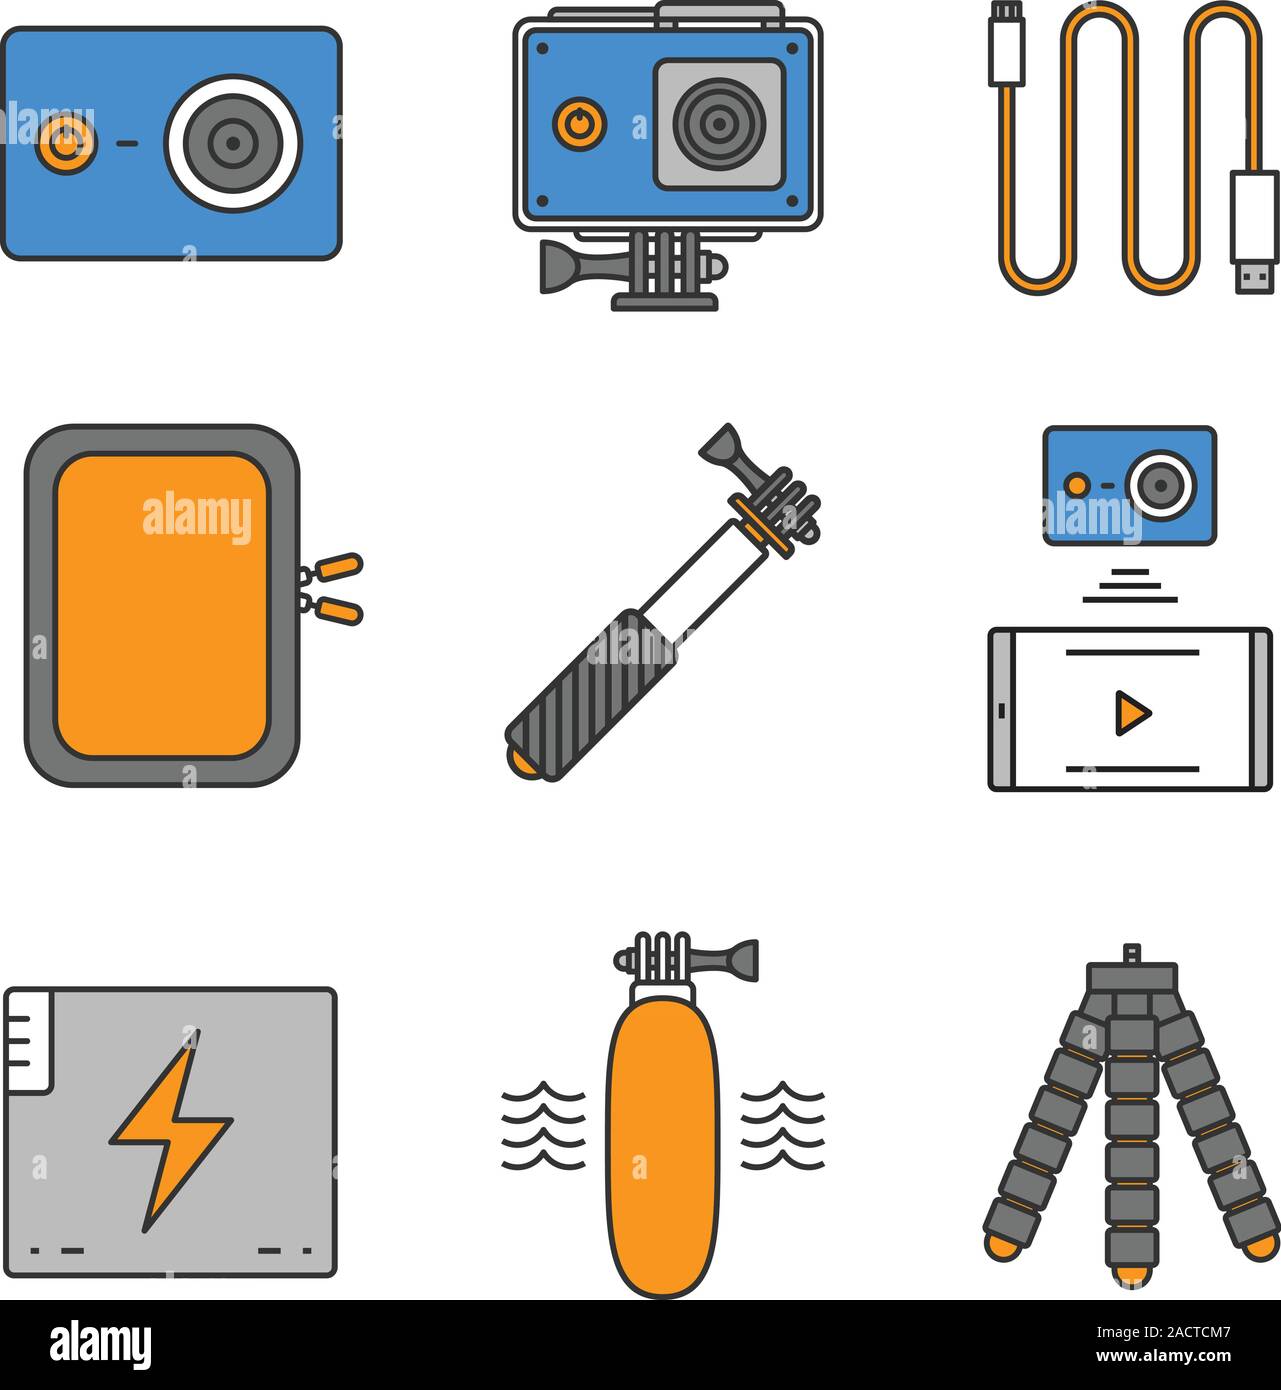 Action camera color icons set. Sport cam, usb cable, battery, phone connection, waterproof case, selfie monopod stick, floating grip, box, tripod. Iso Stock Vector